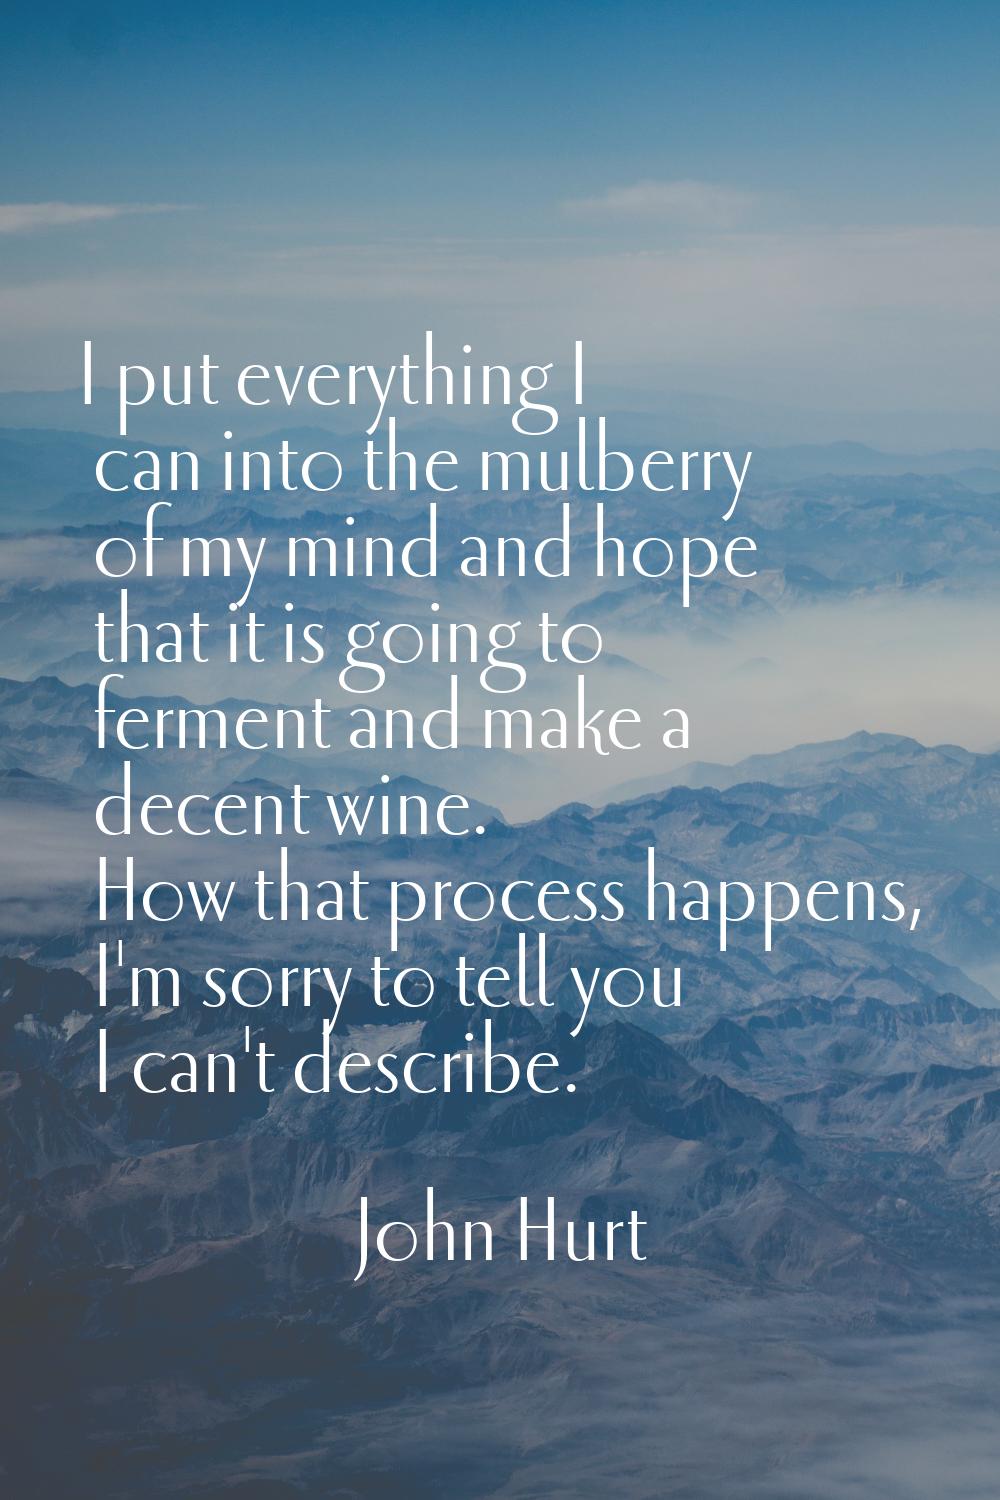 I put everything I can into the mulberry of my mind and hope that it is going to ferment and make a